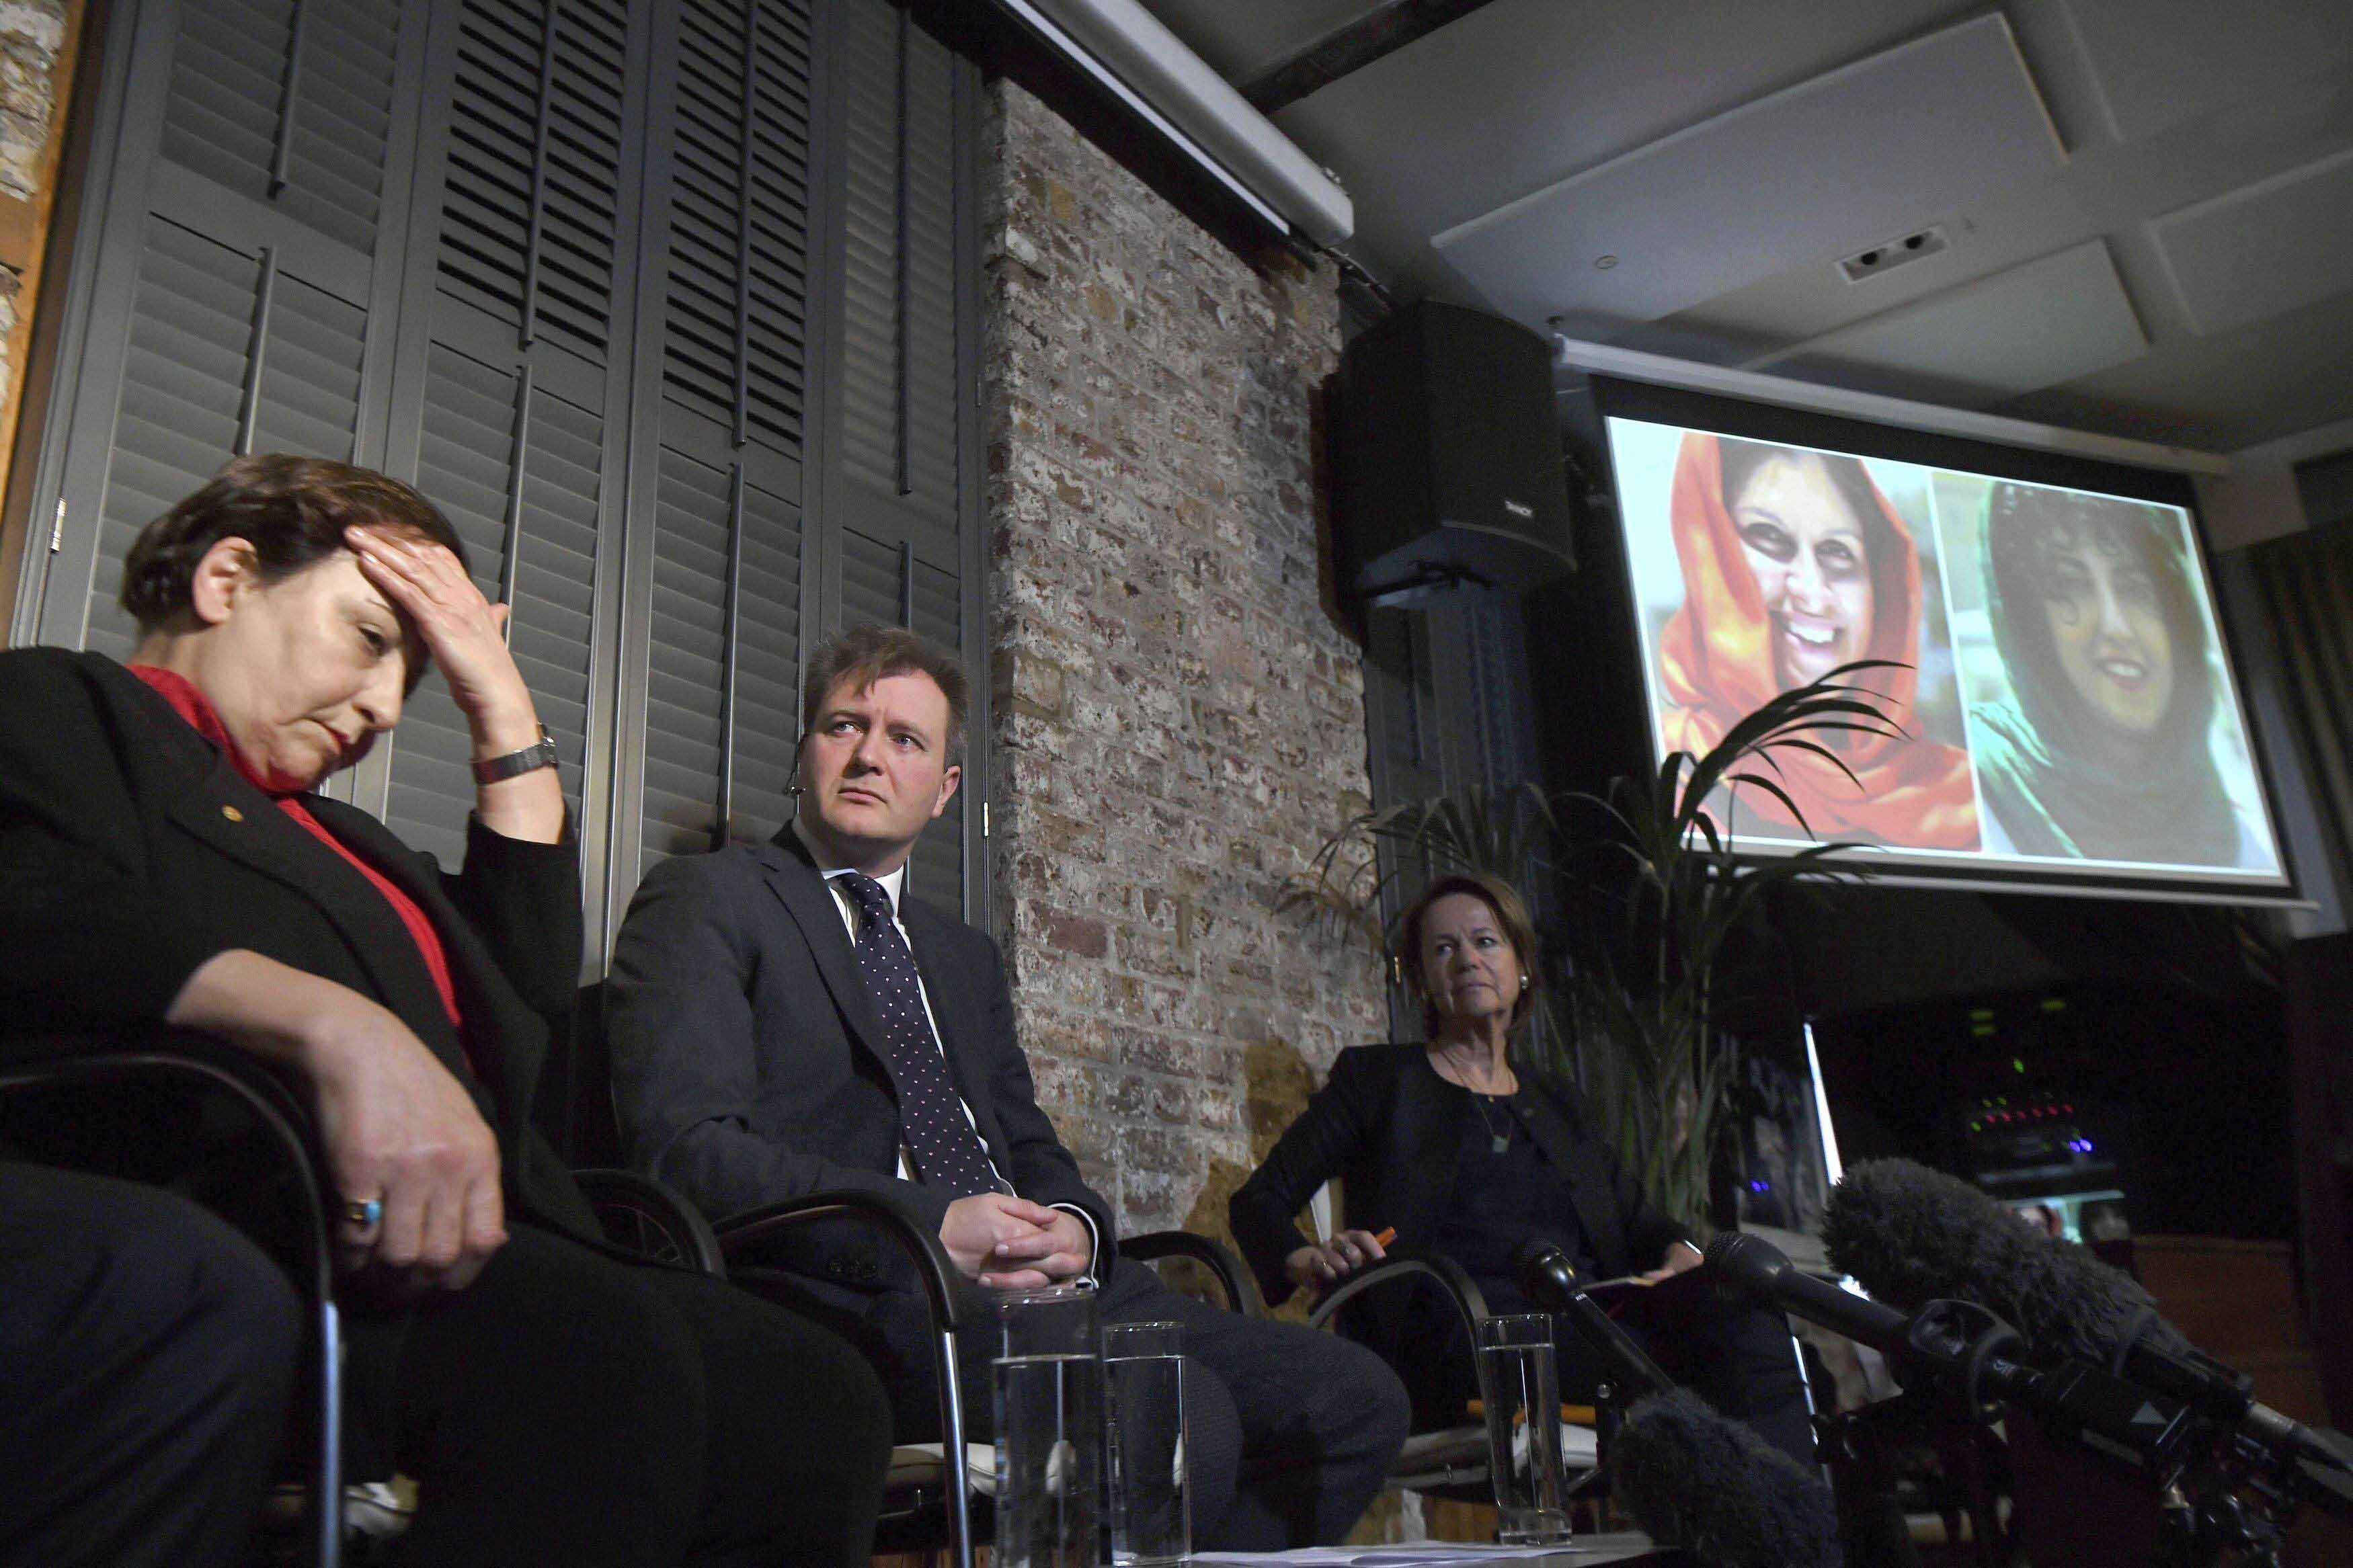 Iranian lawyer and former judge, Shirin Ebadi, and human rights activist and founder of Defenders of Human Rights Centre in Iran sits with, Richard Ratcliffe, the husband of jailed British mother Nazanin Zaghari-Ratcliffe